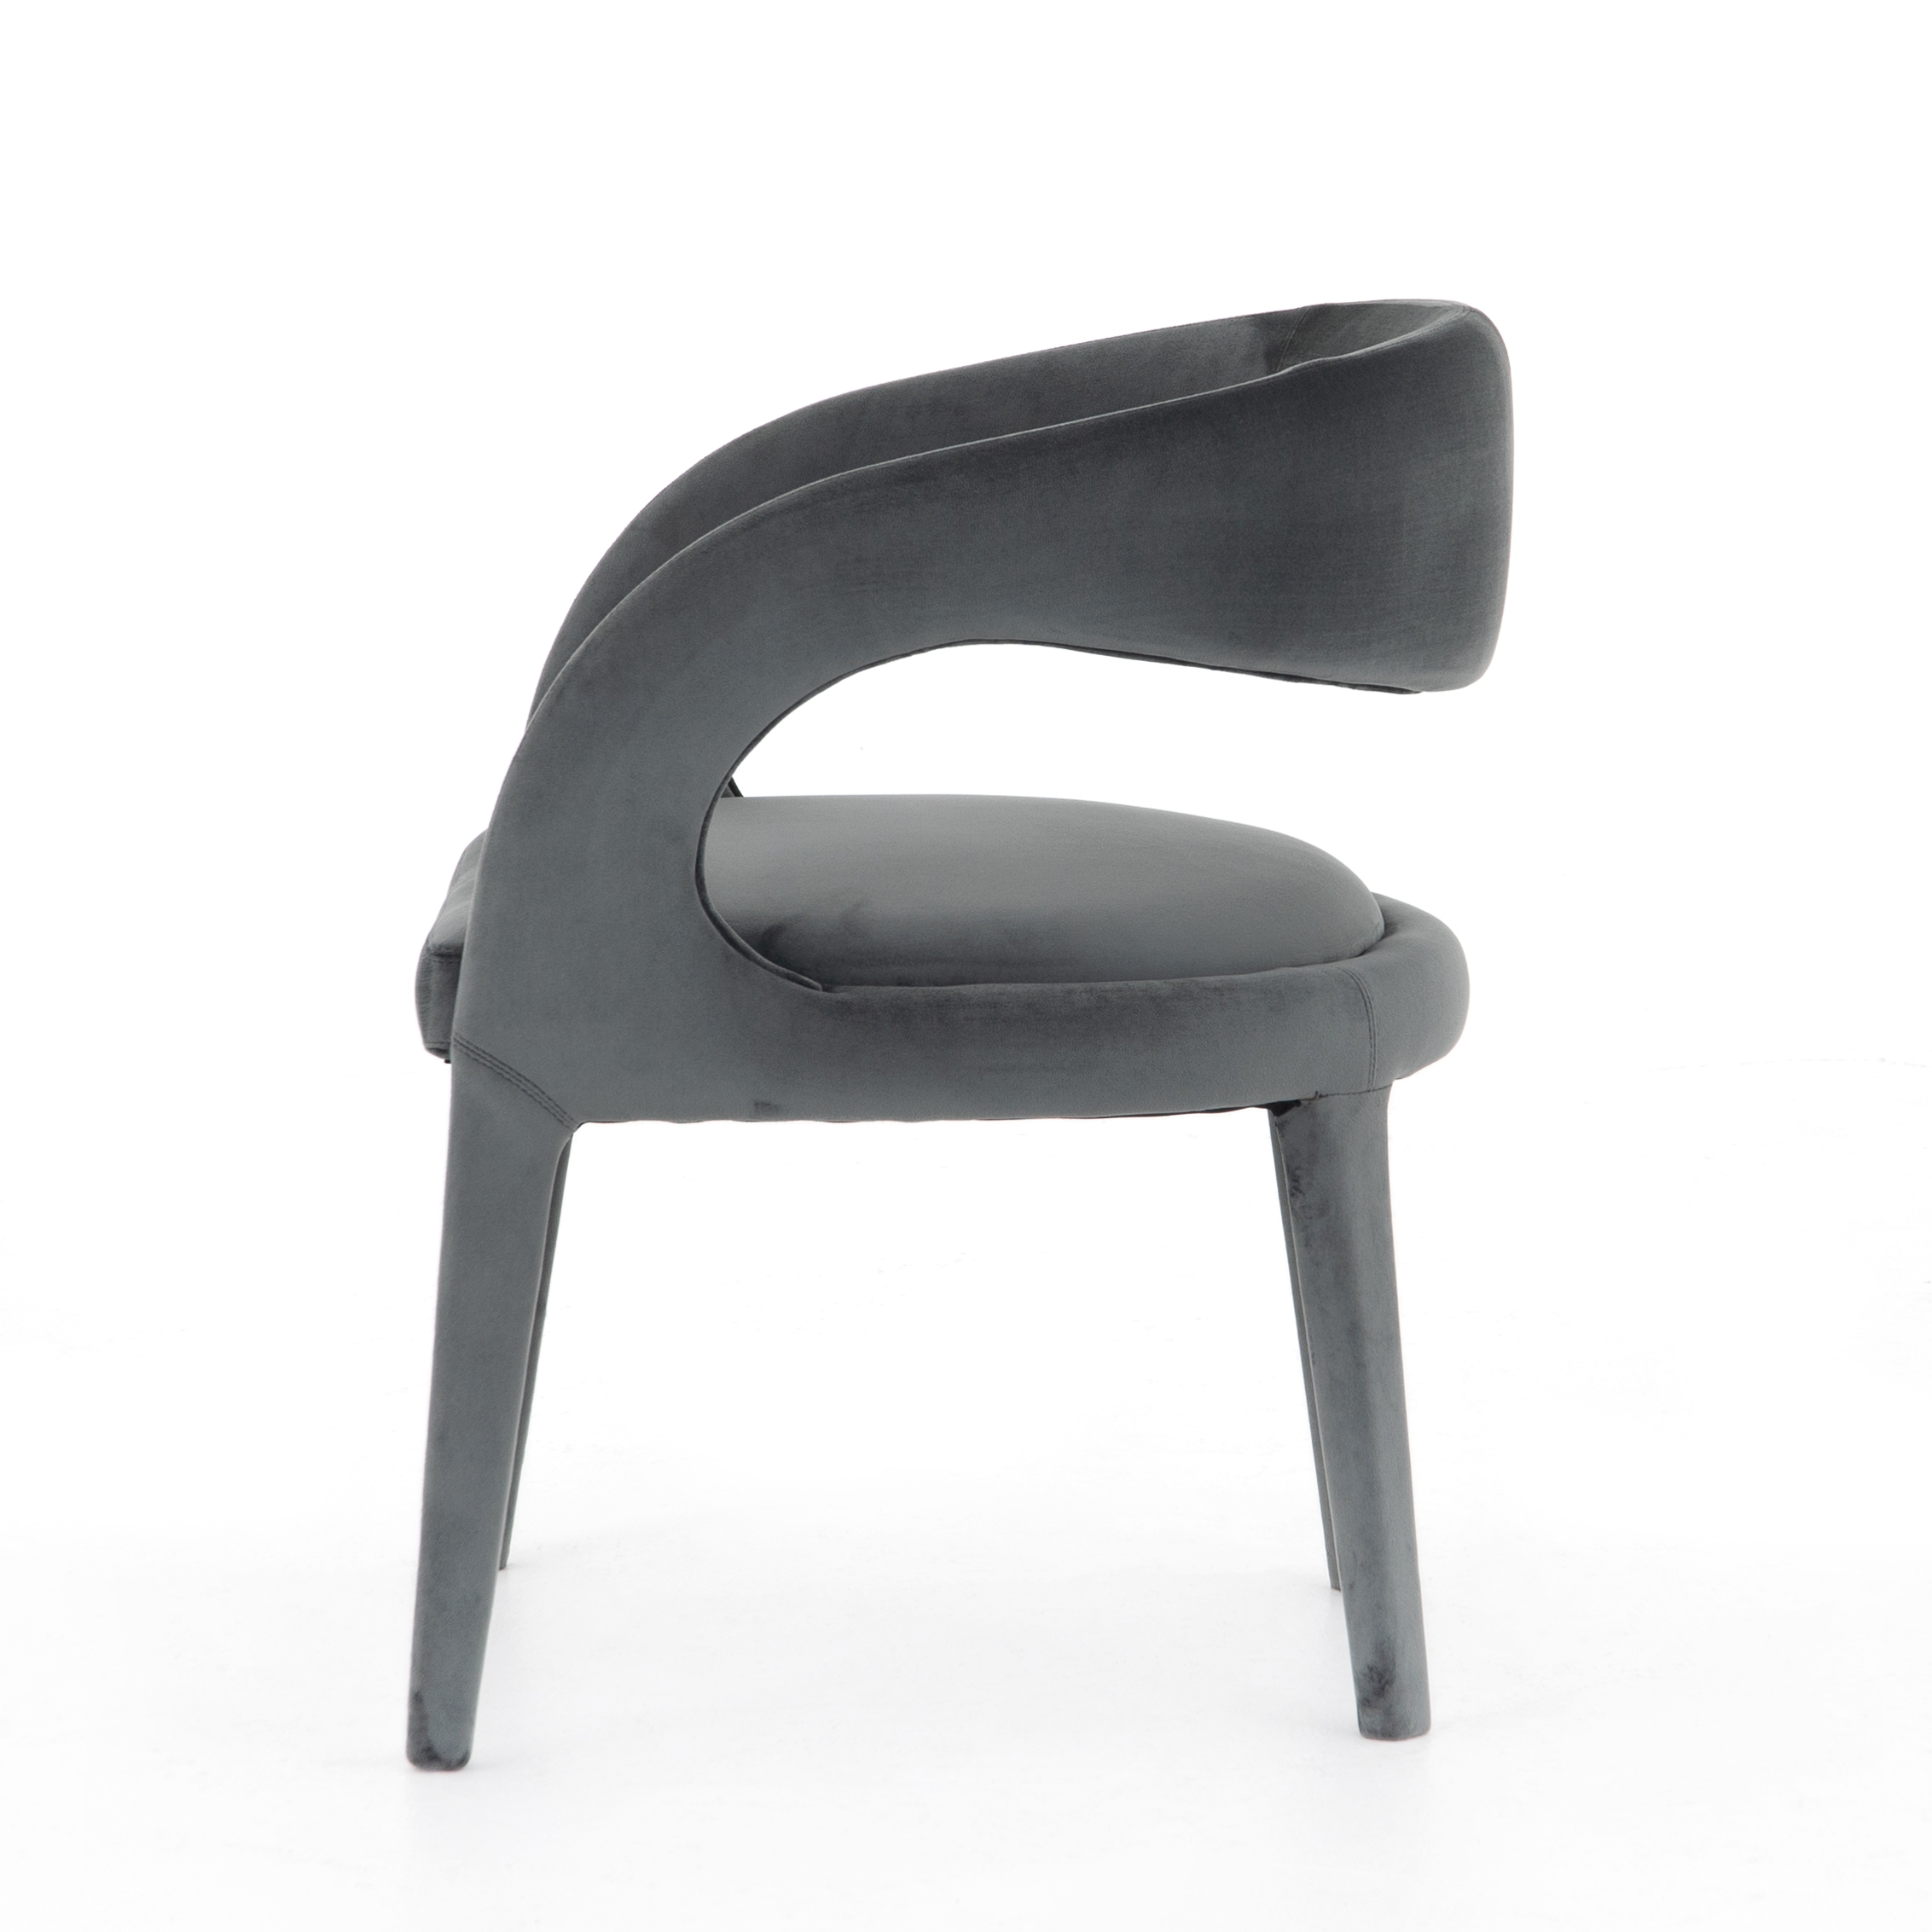 Hawkins Dining Chair-Charcoal Velvet - Image 4